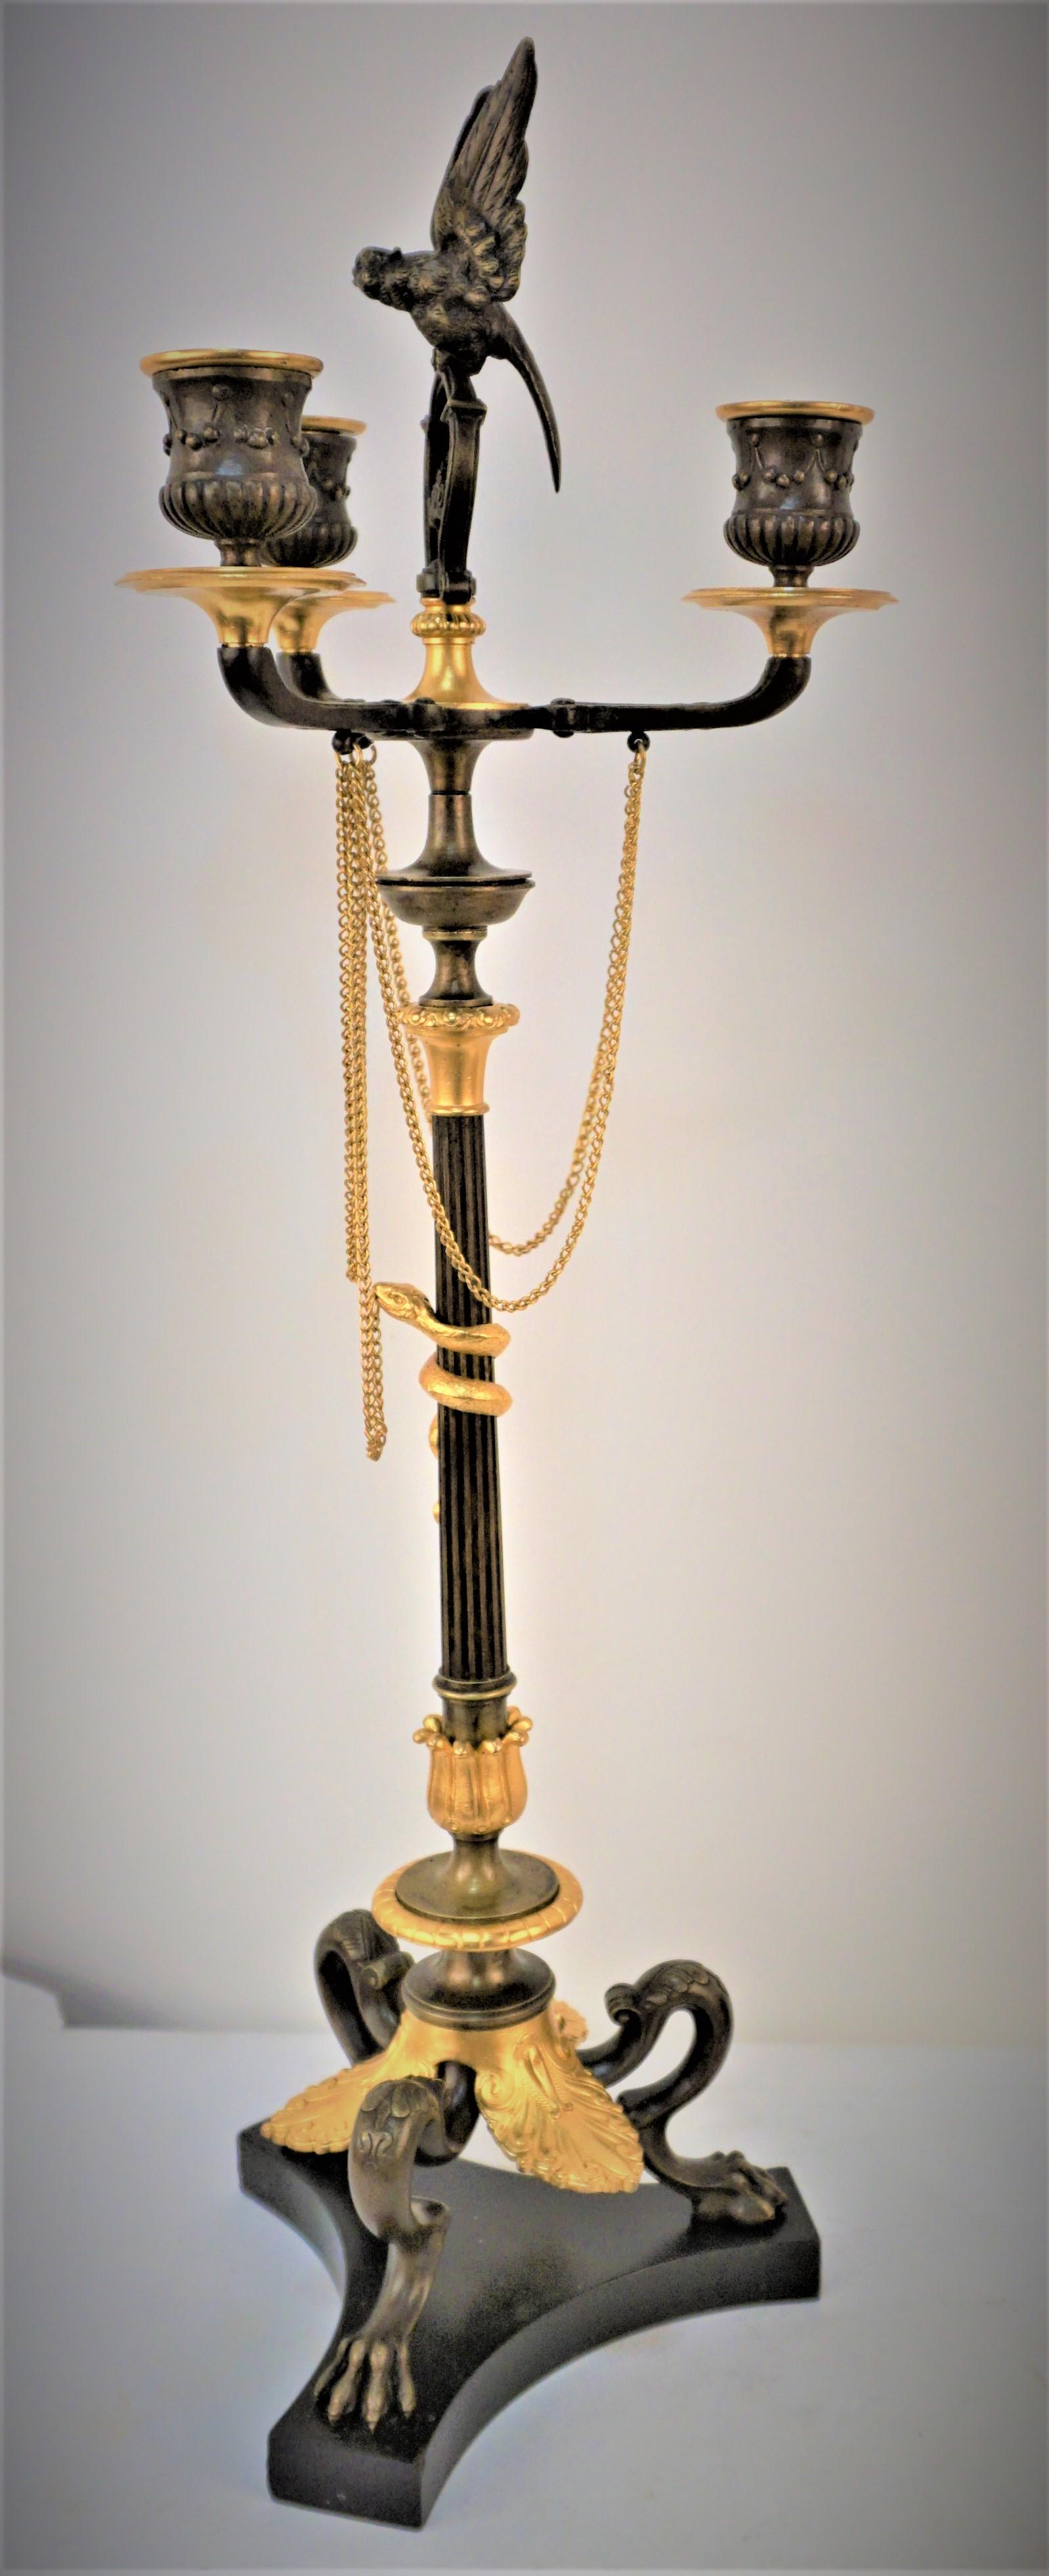 Pair of 19th century in gilt and oxidized bronze with bird finial and snake which is Sambol fertility, a creative life force, rebirth or guardian.